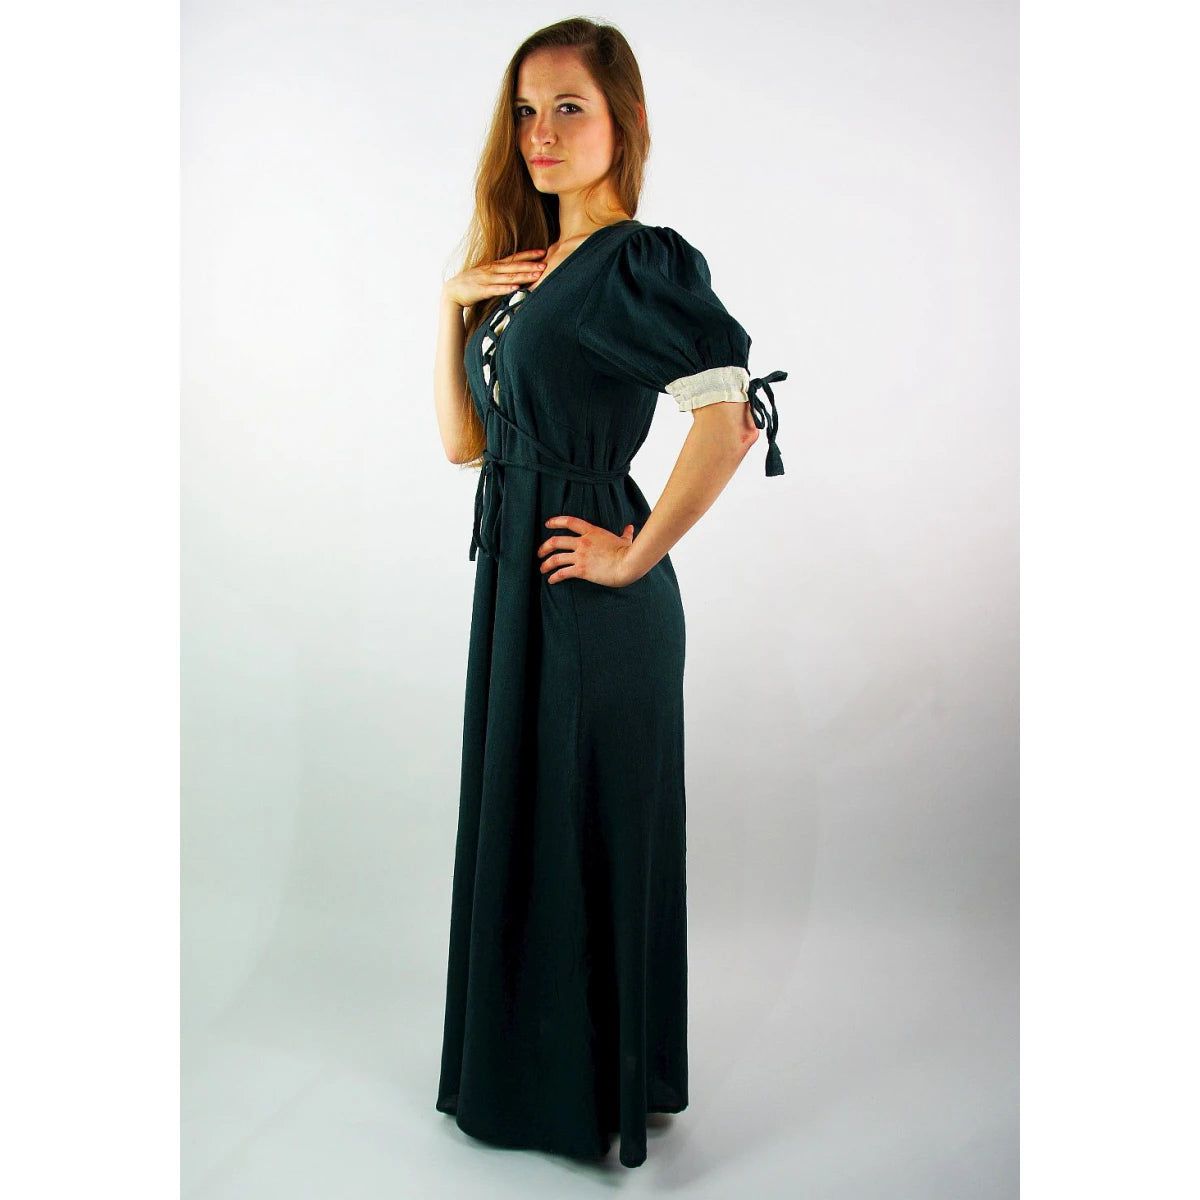 Viking Summer Dress in Green with Laced Front and Sleeves-3